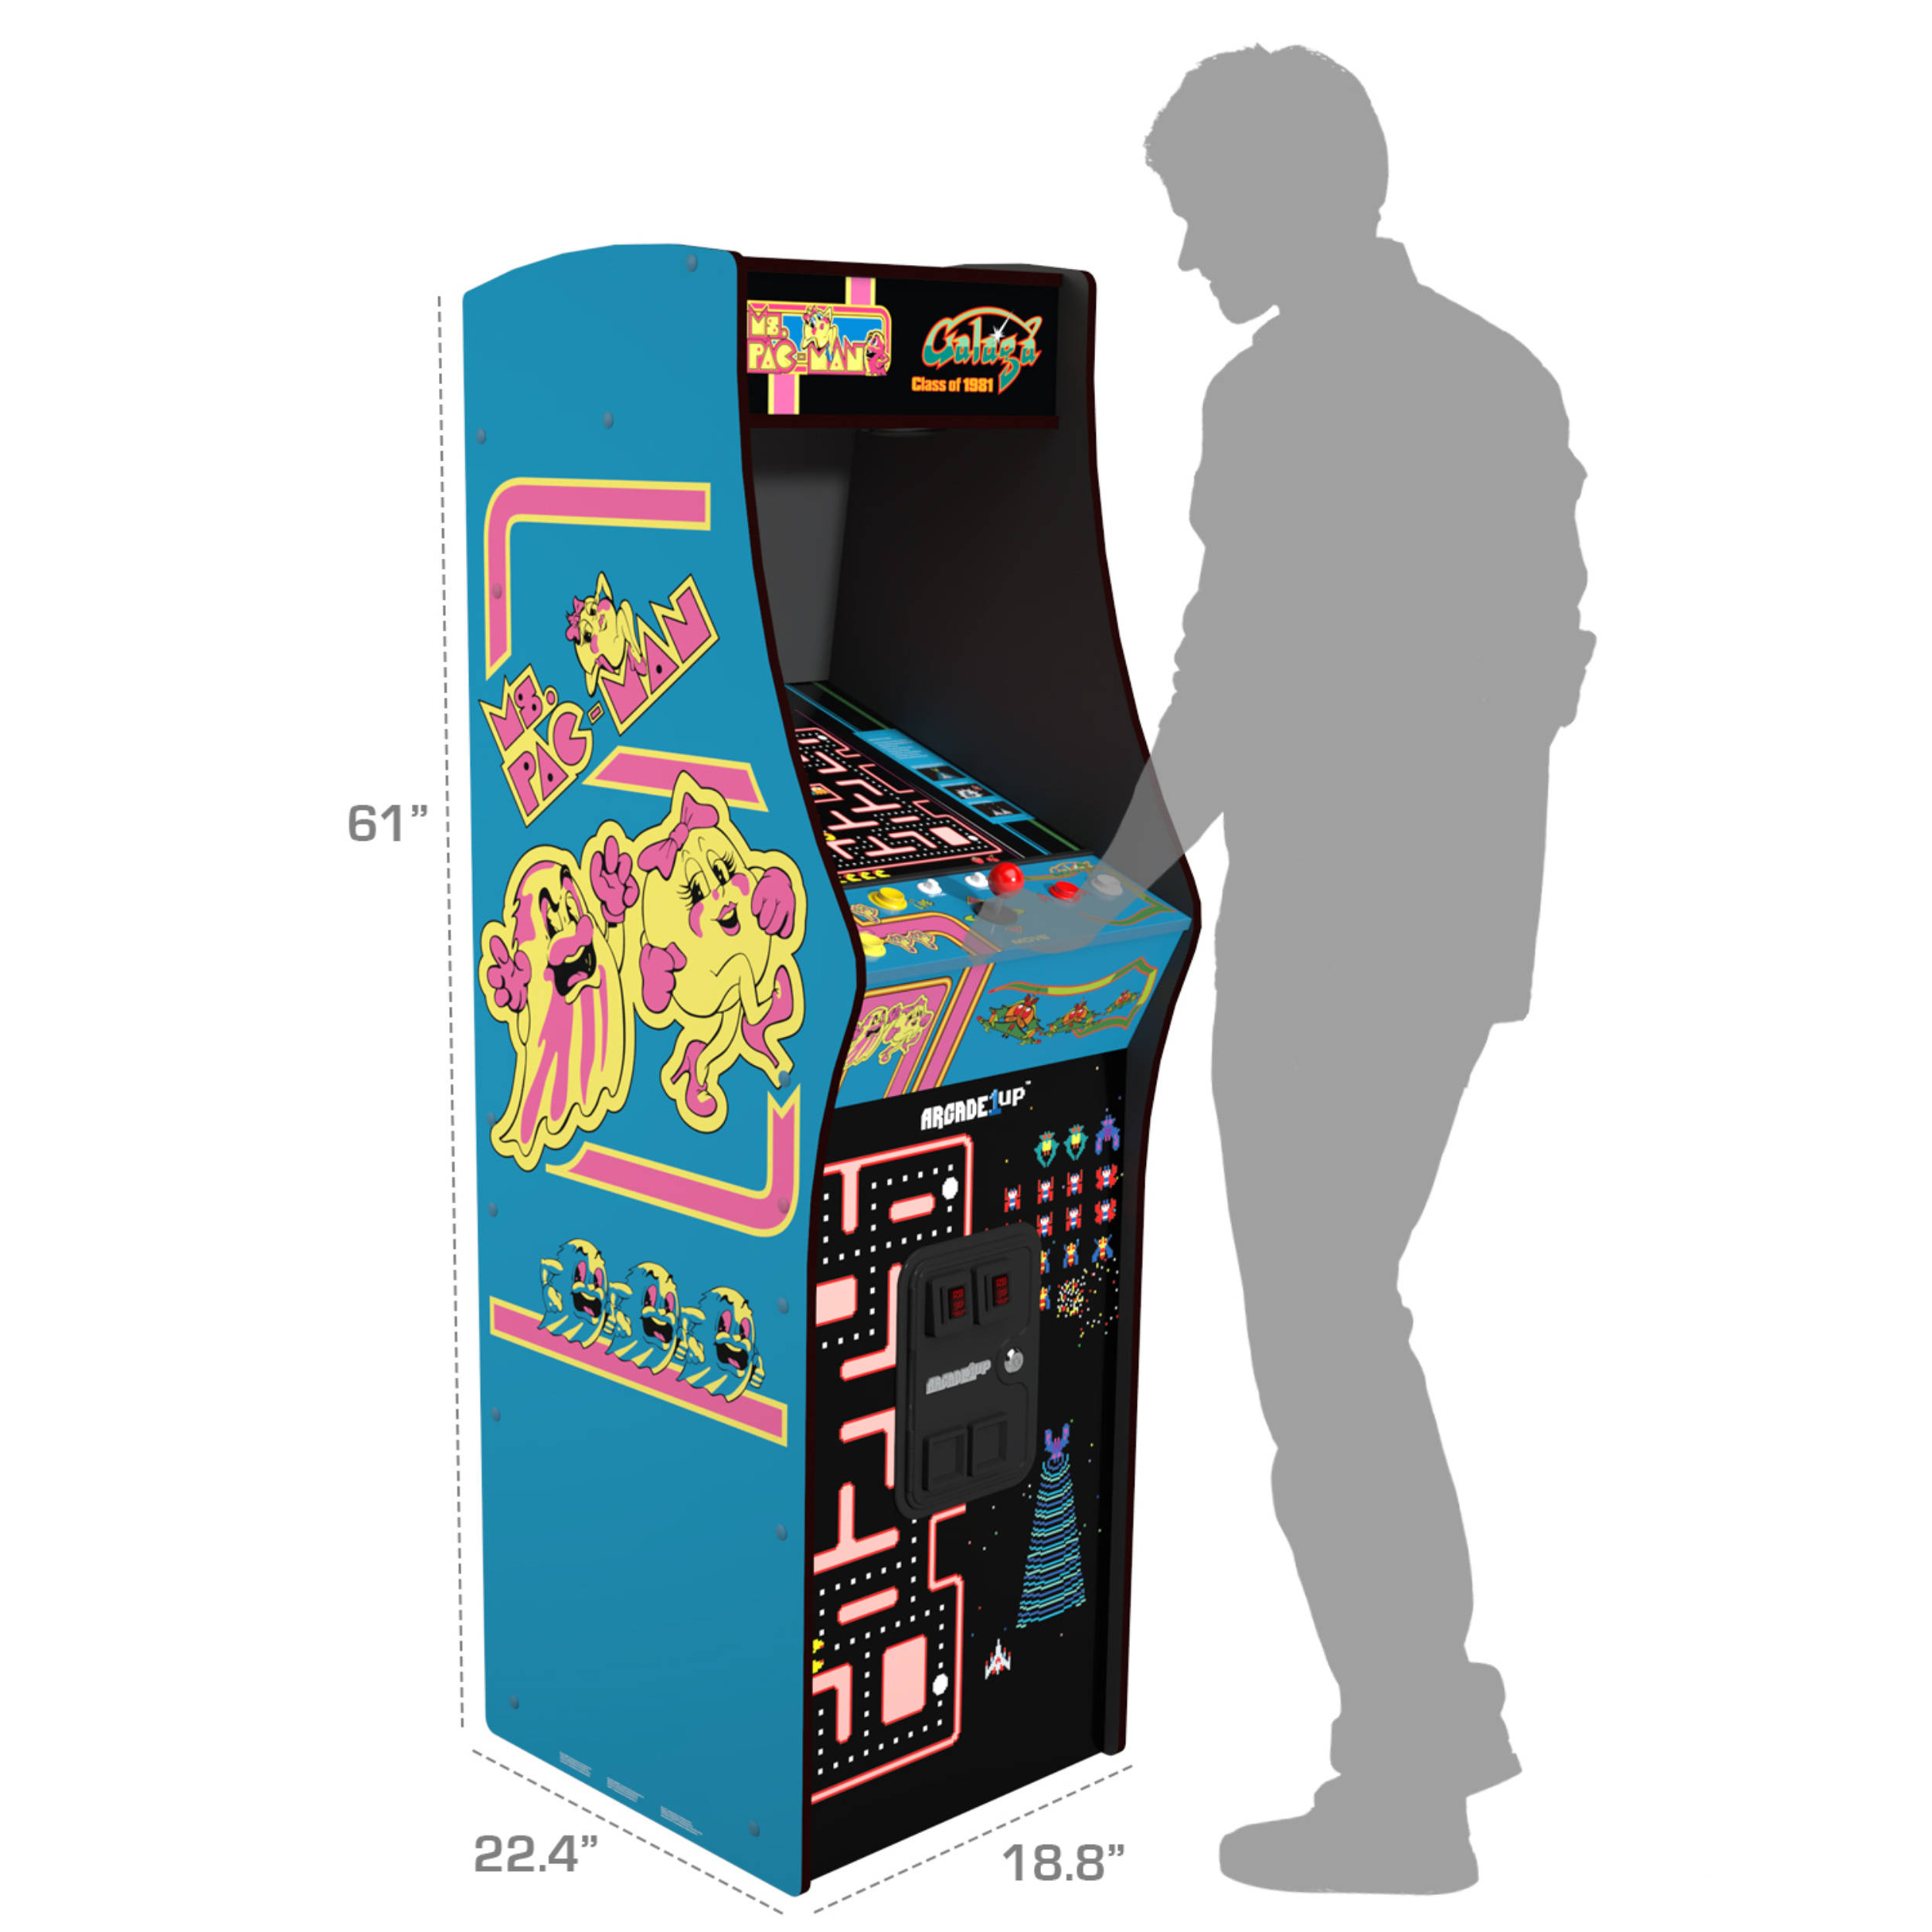 Arcade1up Ms. PAC-MAN & GALAGA Class of ‘81 Deluxe Arcade Machine 12-in-1 Game